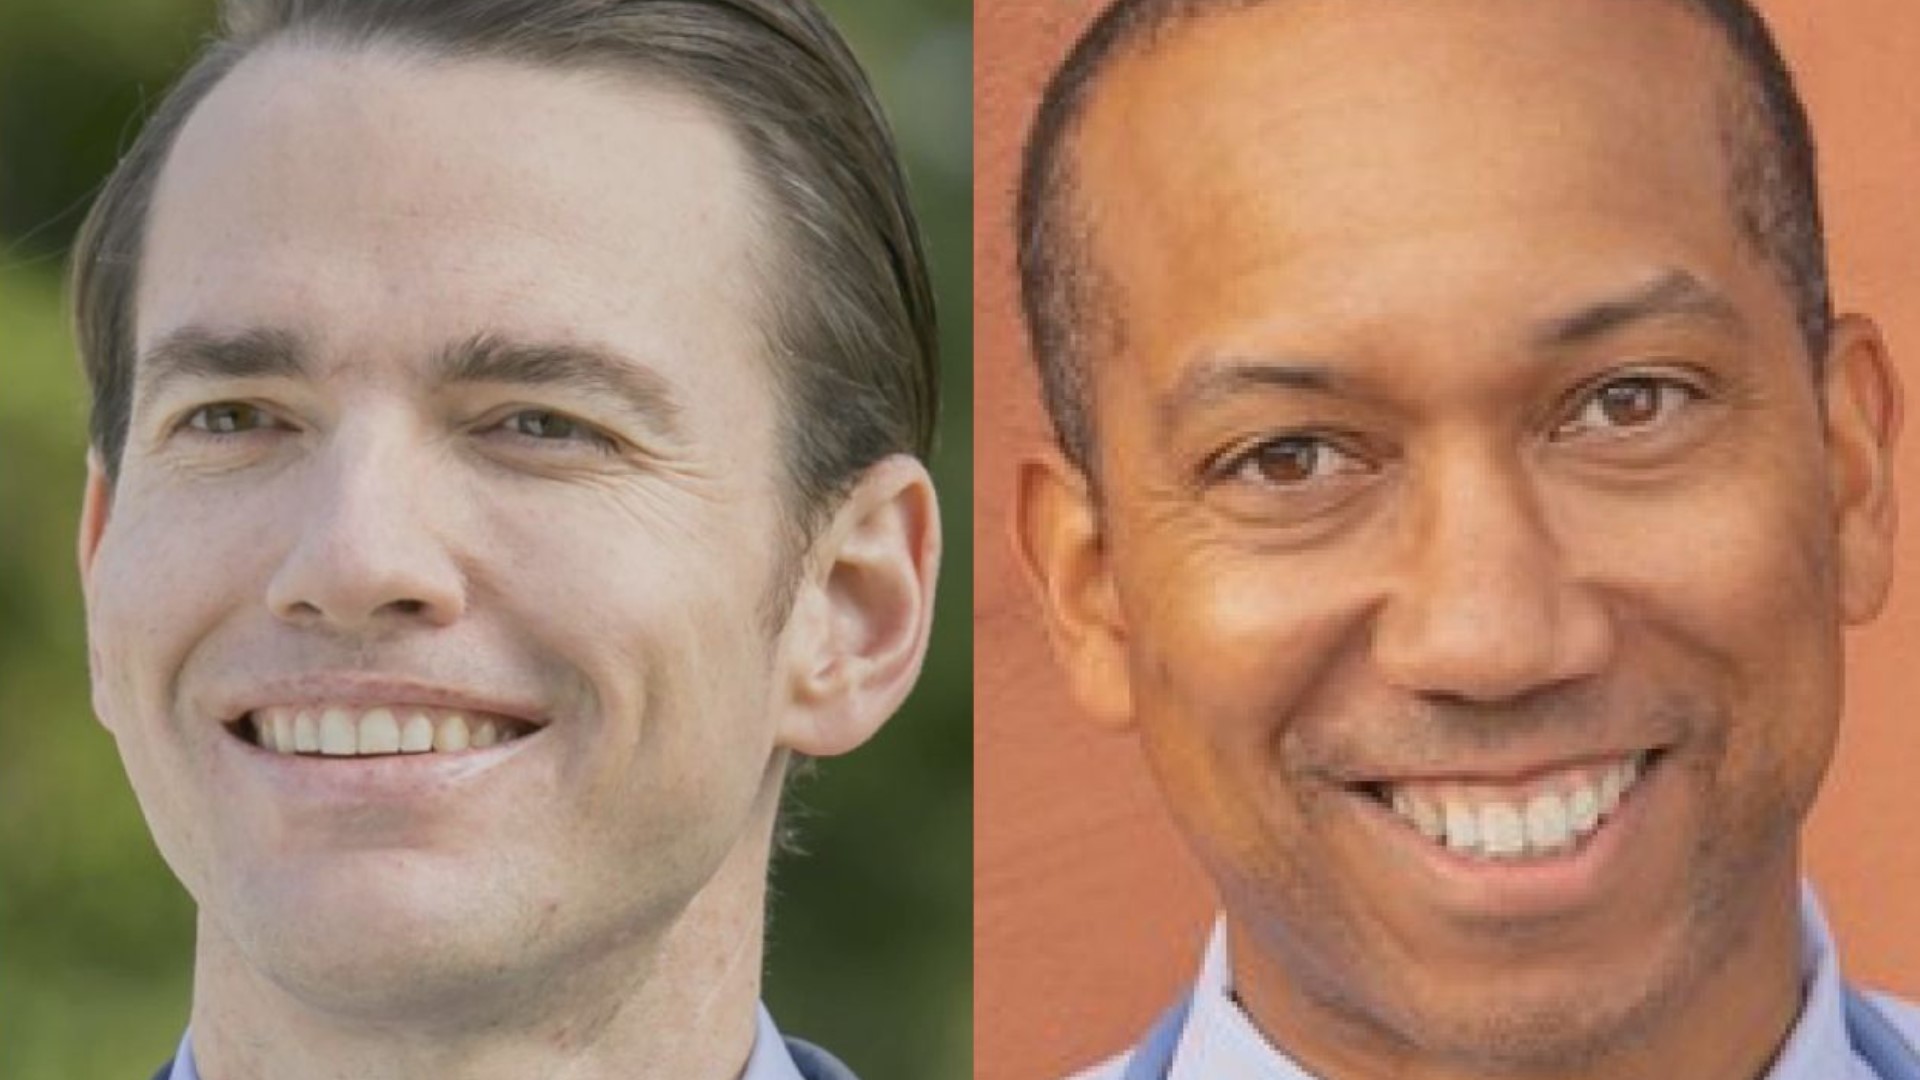 The race featured two well-known conservatives in Sacramento County Sheriff Scott Jones and Assemblyman Kevin Kiley.